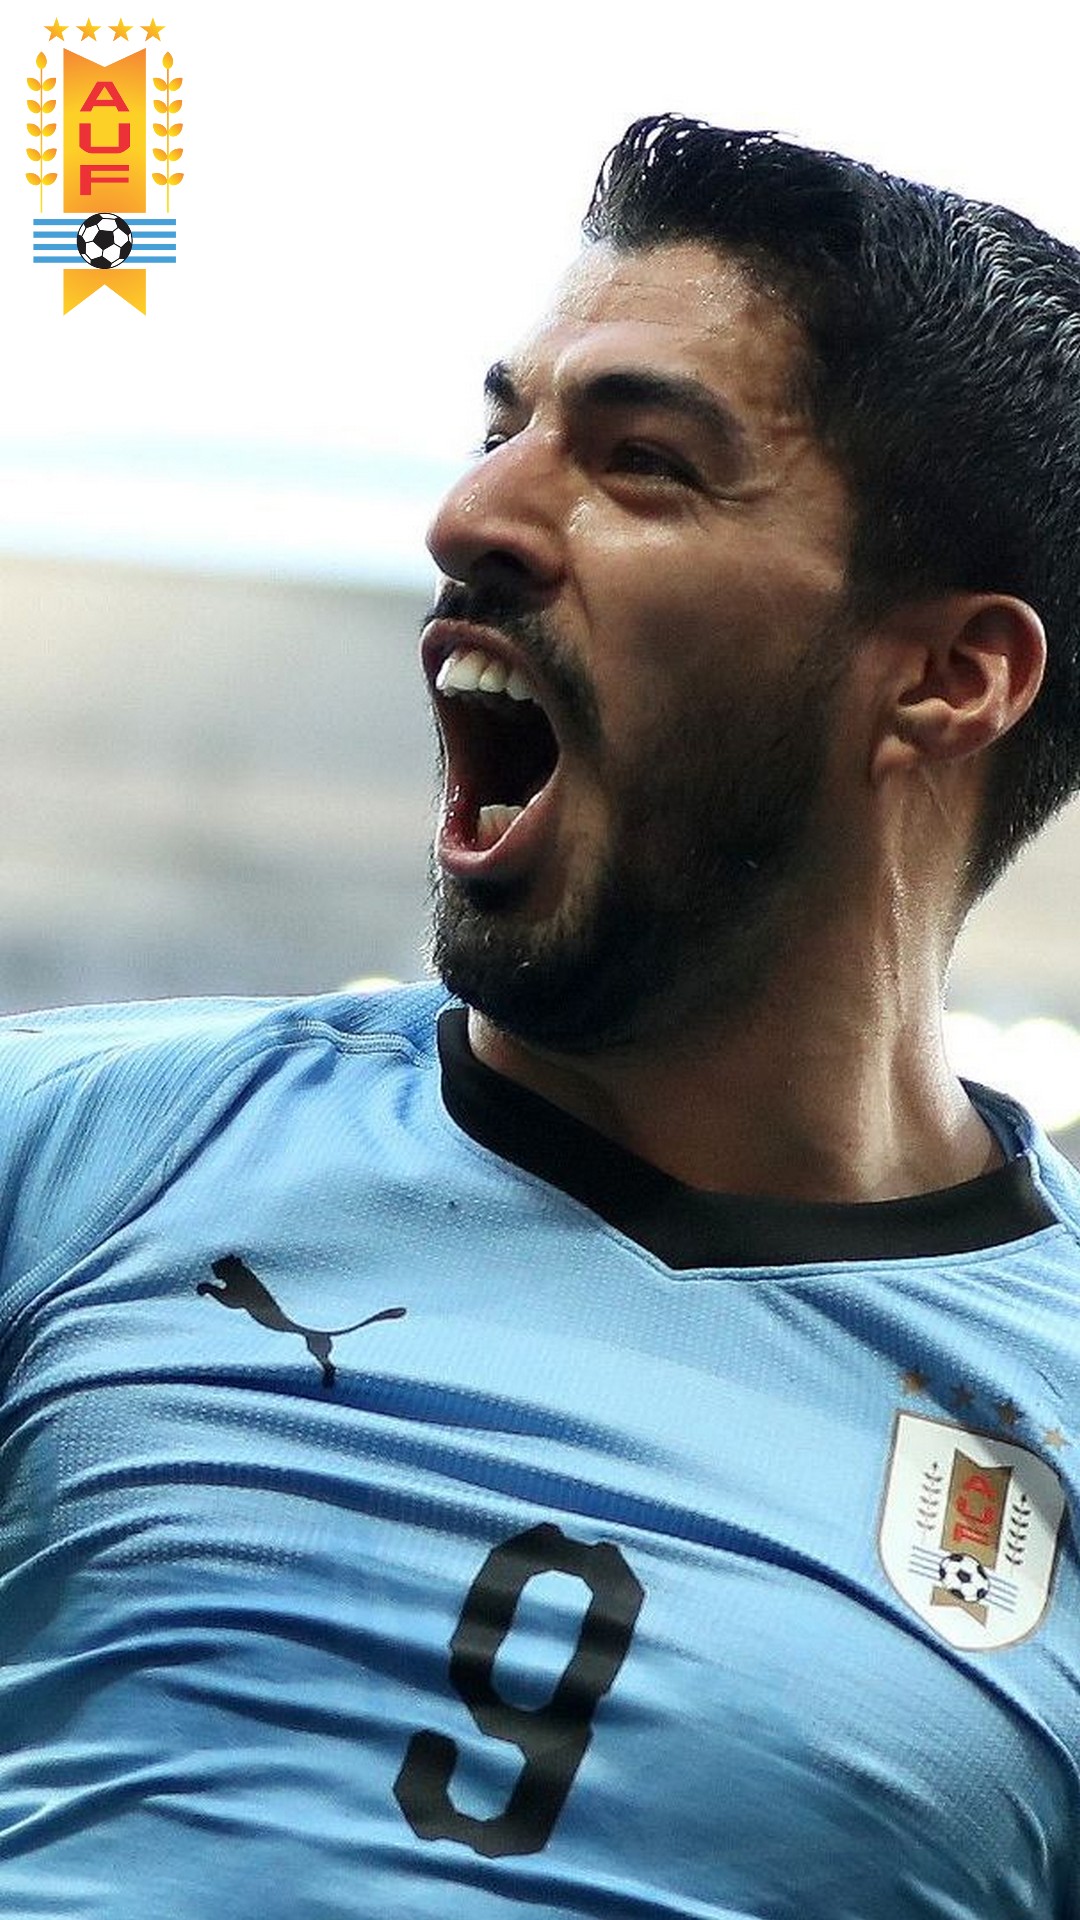 Luis Suarez Uruguay iPhone 8 Wallpaper With Resolution 1080X1920 pixel. You can make this wallpaper for your Mac or Windows Desktop Background, iPhone, Android or Tablet and another Smartphone device for free